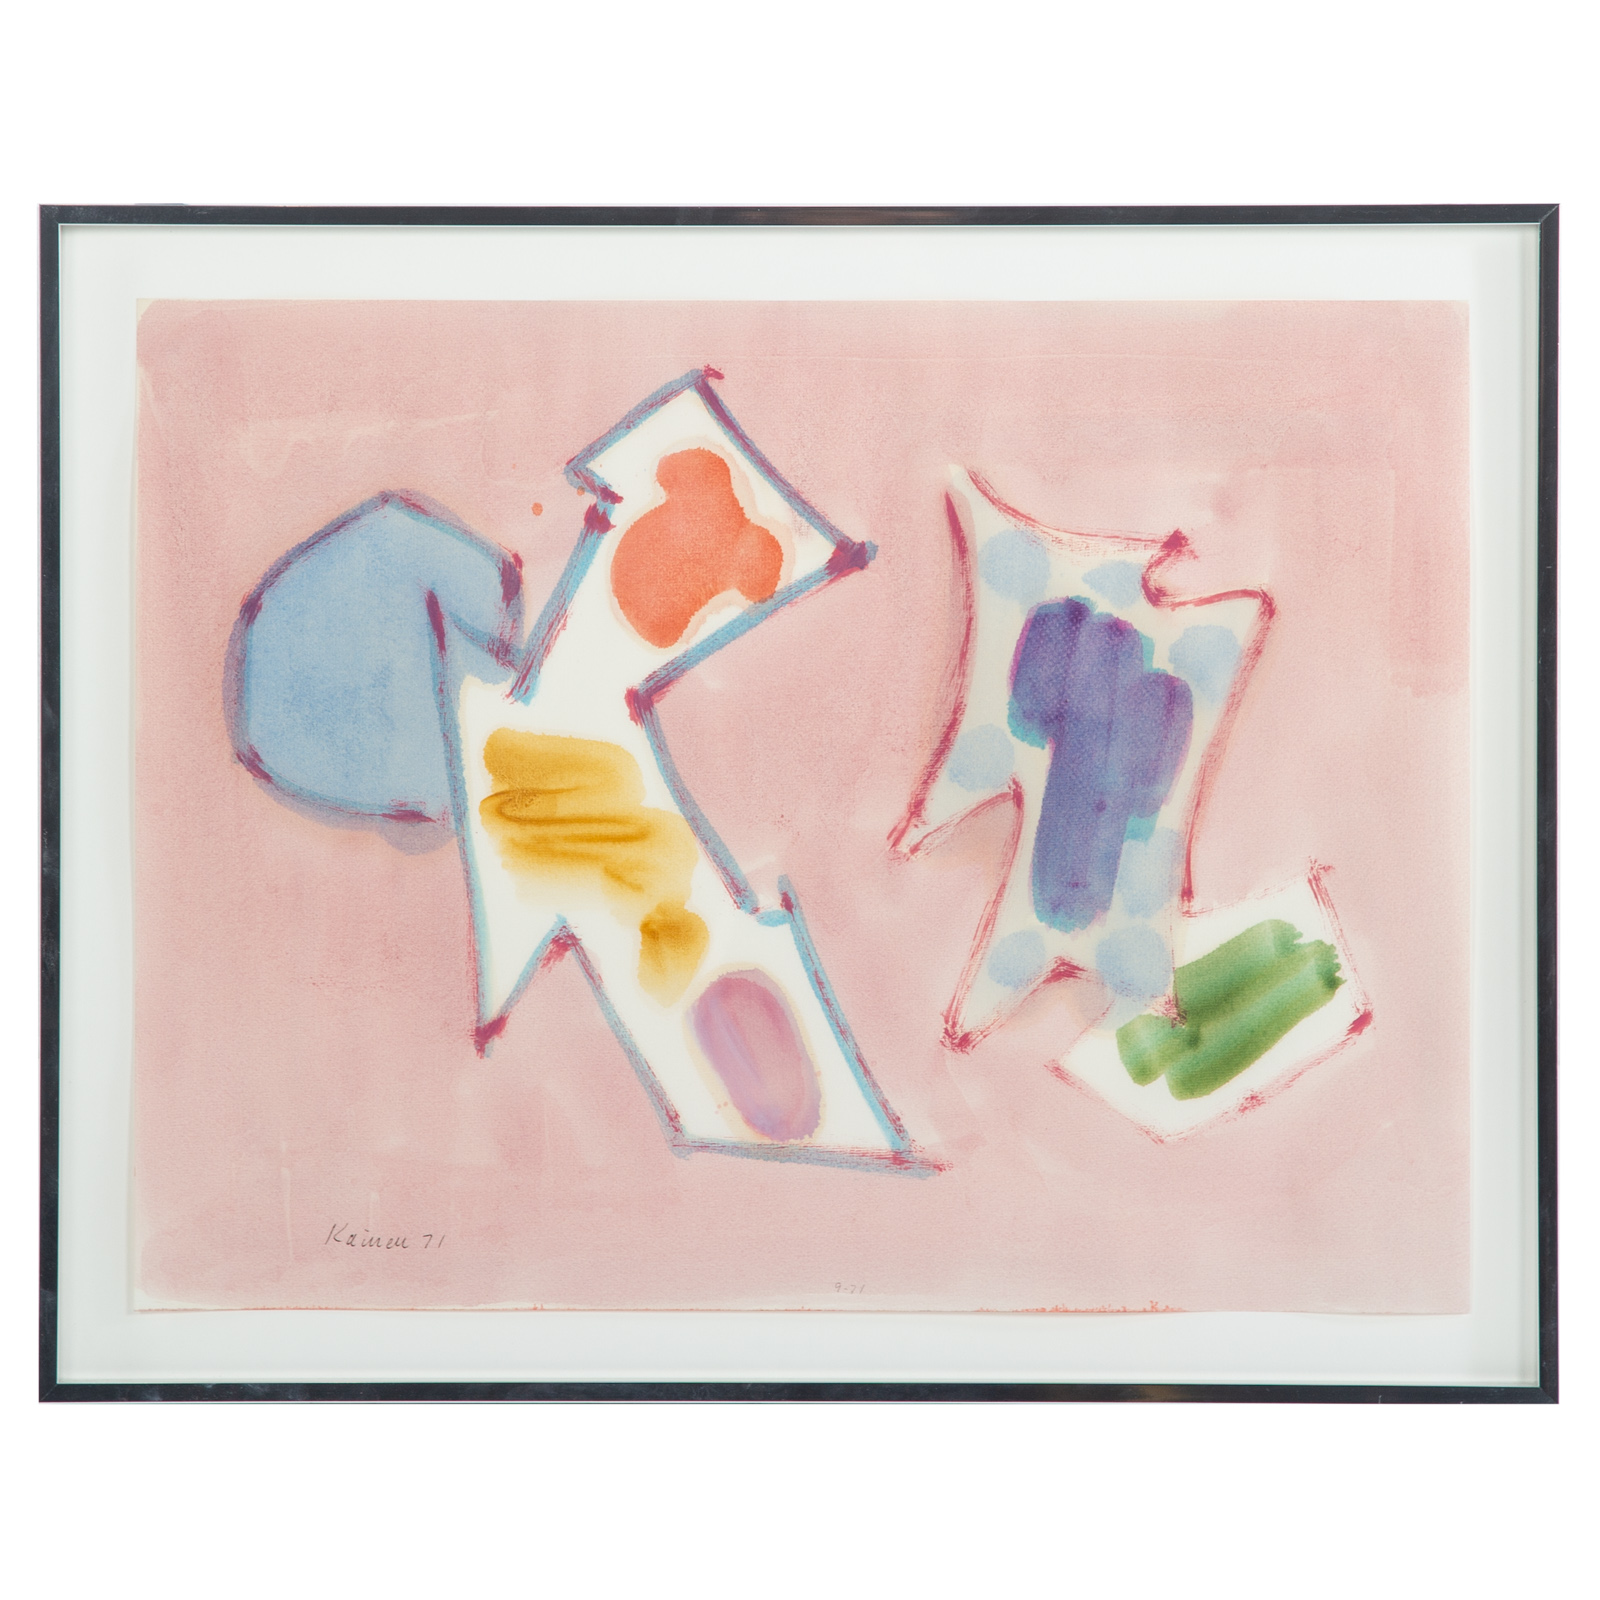 JACOB KAINEN PINK ABSTRACT WATERCOLOR 3694db